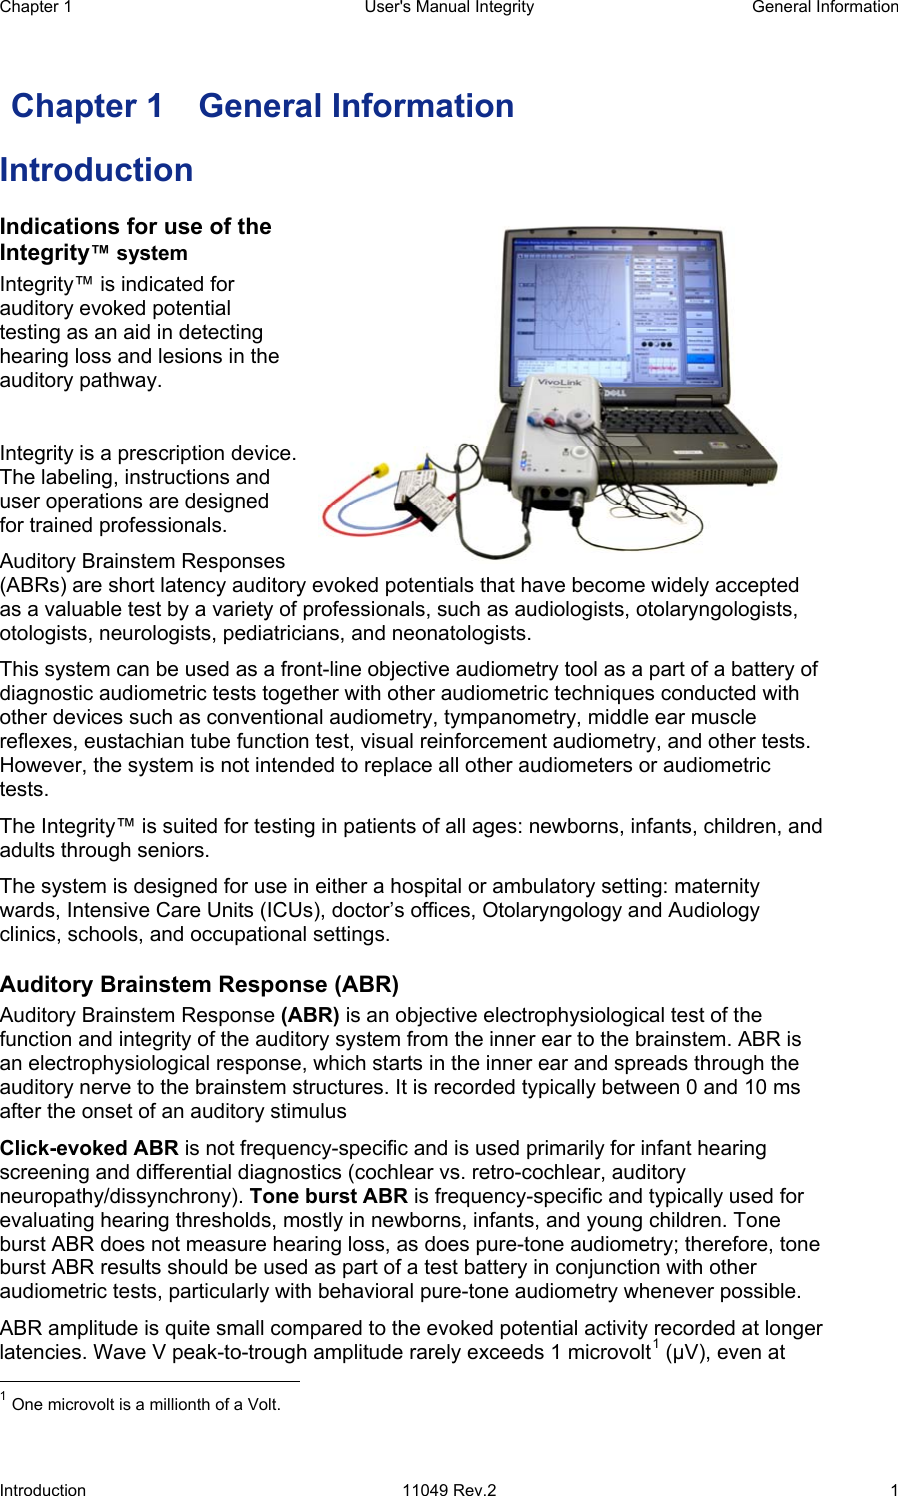 Chapter 1  User&apos;s Manual Integrity  General Information Introduction 11049 Rev.2  1  Chapter 1  General Information Introduction Indications for use of the Integrity™ system Integrity™ is indicated for auditory evoked potential testing as an aid in detecting hearing loss and lesions in the auditory pathway.   Integrity is a prescription device.  The labeling, instructions and user operations are designed for trained professionals.  Auditory Brainstem Responses (ABRs) are short latency auditory evoked potentials that have become widely accepted as a valuable test by a variety of professionals, such as audiologists, otolaryngologists, otologists, neurologists, pediatricians, and neonatologists.  This system can be used as a front-line objective audiometry tool as a part of a battery of diagnostic audiometric tests together with other audiometric techniques conducted with other devices such as conventional audiometry, tympanometry, middle ear muscle reflexes, eustachian tube function test, visual reinforcement audiometry, and other tests. However, the system is not intended to replace all other audiometers or audiometric tests.  The Integrity™ is suited for testing in patients of all ages: newborns, infants, children, and adults through seniors.  The system is designed for use in either a hospital or ambulatory setting: maternity wards, Intensive Care Units (ICUs), doctor’s offices, Otolaryngology and Audiology clinics, schools, and occupational settings.  Auditory Brainstem Response (ABR) Auditory Brainstem Response (ABR) is an objective electrophysiological test of the function and integrity of the auditory system from the inner ear to the brainstem. ABR is an electrophysiological response, which starts in the inner ear and spreads through the auditory nerve to the brainstem structures. It is recorded typically between 0 and 10 ms after the onset of an auditory stimulus Click-evoked ABR is not frequency-specific and is used primarily for infant hearing screening and differential diagnostics (cochlear vs. retro-cochlear, auditory neuropathy/dissynchrony). Tone burst ABR is frequency-specific and typically used for evaluating hearing thresholds, mostly in newborns, infants, and young children. Tone burst ABR does not measure hearing loss, as does pure-tone audiometry; therefore, tone burst ABR results should be used as part of a test battery in conjunction with other audiometric tests, particularly with behavioral pure-tone audiometry whenever possible.  ABR amplitude is quite small compared to the evoked potential activity recorded at longer latencies. Wave V peak-to-trough amplitude rarely exceeds 1 microvolt1 (μV), even at                                                  1 One microvolt is a millionth of a Volt. 